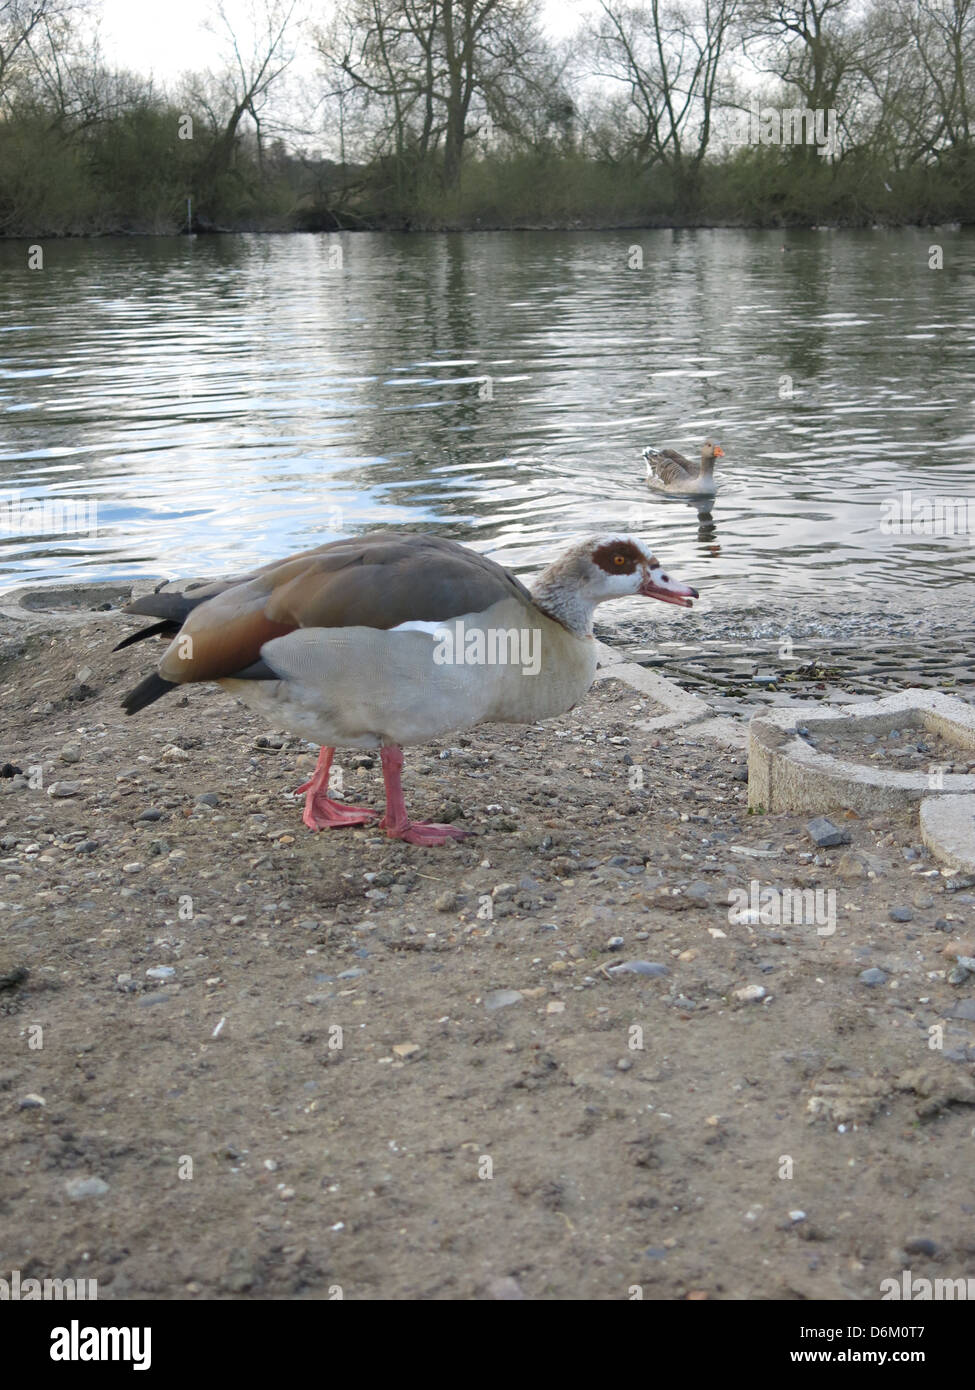 Egyptian Goose By The River Thames, Reading, Berkshire. Stock Photo